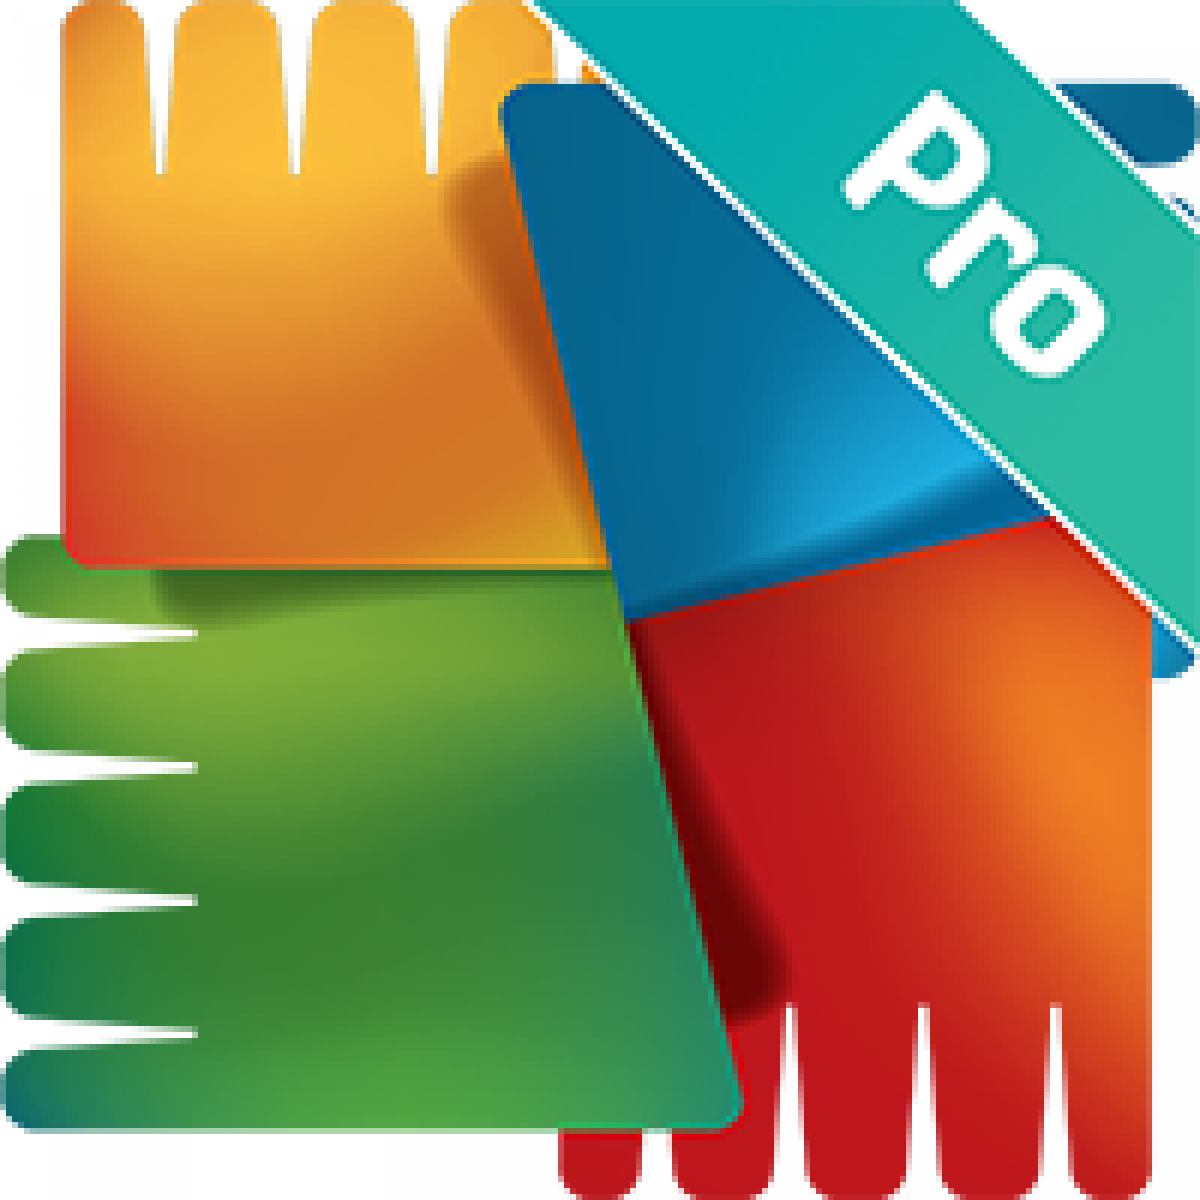 AVG AntiVirus PRO Crack For Android Security Latest Software